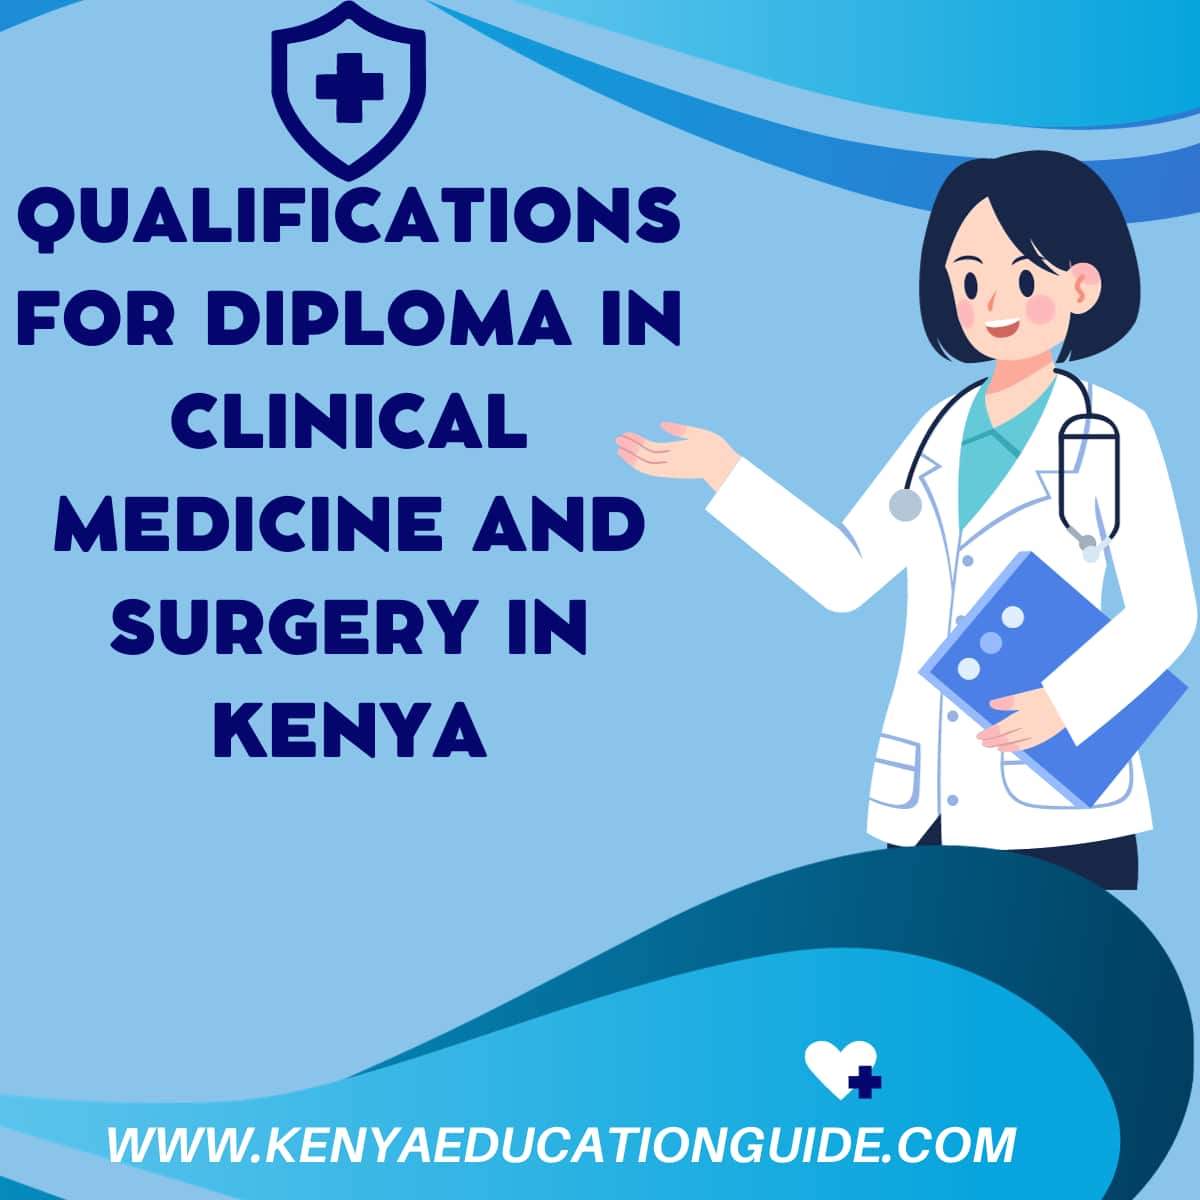 Qualifications for Diploma in Clinical Medicine and Surgery